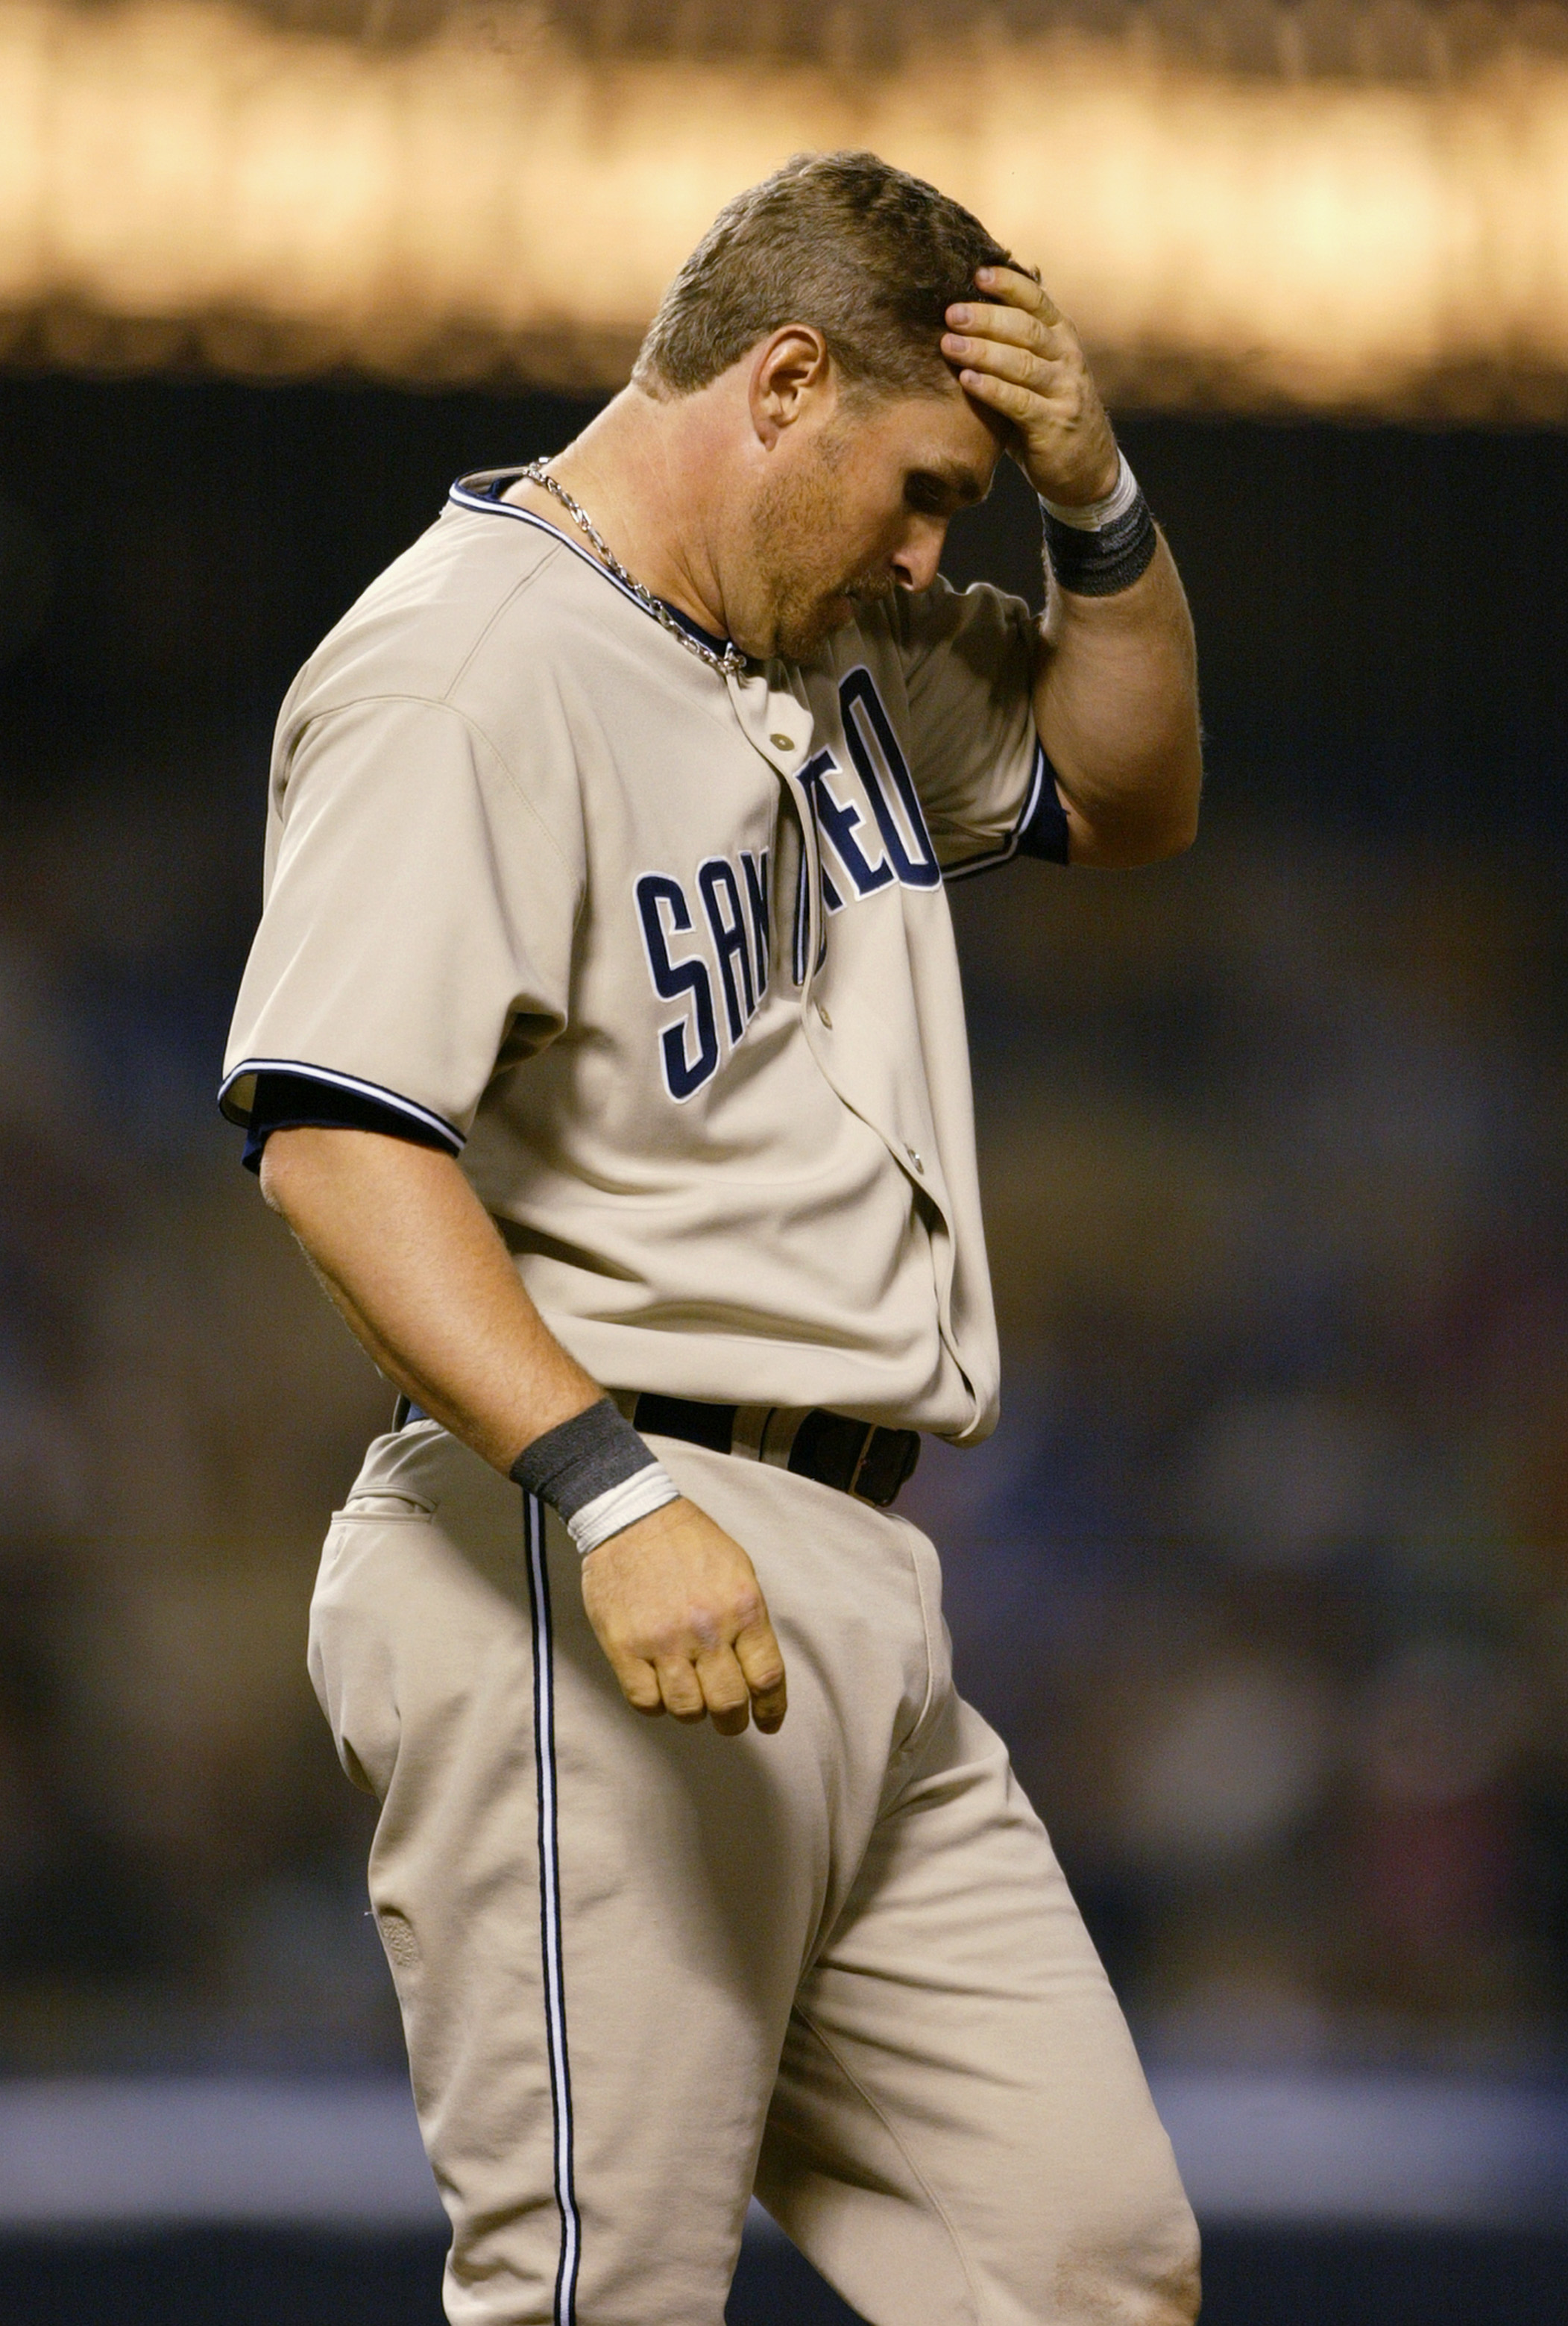 LOS ANGELES - APRIL 6:  First basemen Phil Nevin #23 of the San Diego Padres reacts during the game against the Los Angeles Dodgers on April 6, 2004 at Dodger Stadium in Los Angeles, California.  The Dodgers won 5-4. (Photo by Doug Benc/Getty Images)